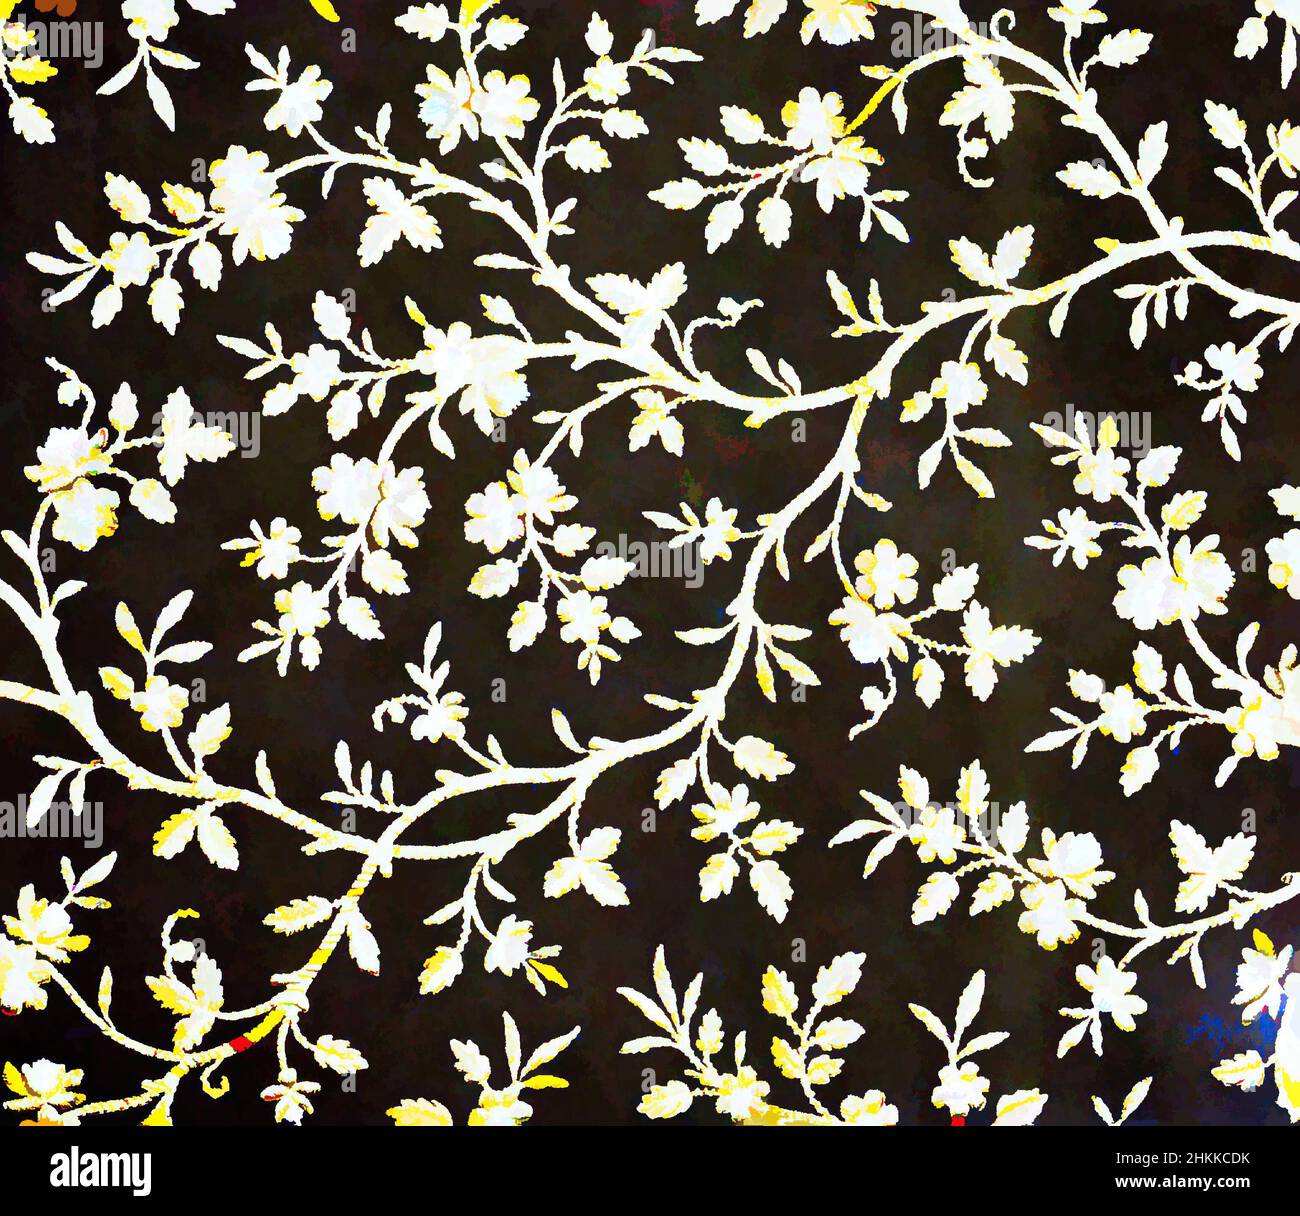 Art inspired by Wallpaper, Paper, ca. 1870-1890, 19 3/4 x 25 1/2 in., 50.2 x 64.8 cm, decorative, floral, flower, pattern, vines, Classic works modernized by Artotop with a splash of modernity. Shapes, color and value, eye-catching visual impact on art. Emotions through freedom of artworks in a contemporary way. A timeless message pursuing a wildly creative new direction. Artists turning to the digital medium and creating the Artotop NFT Stock Photo